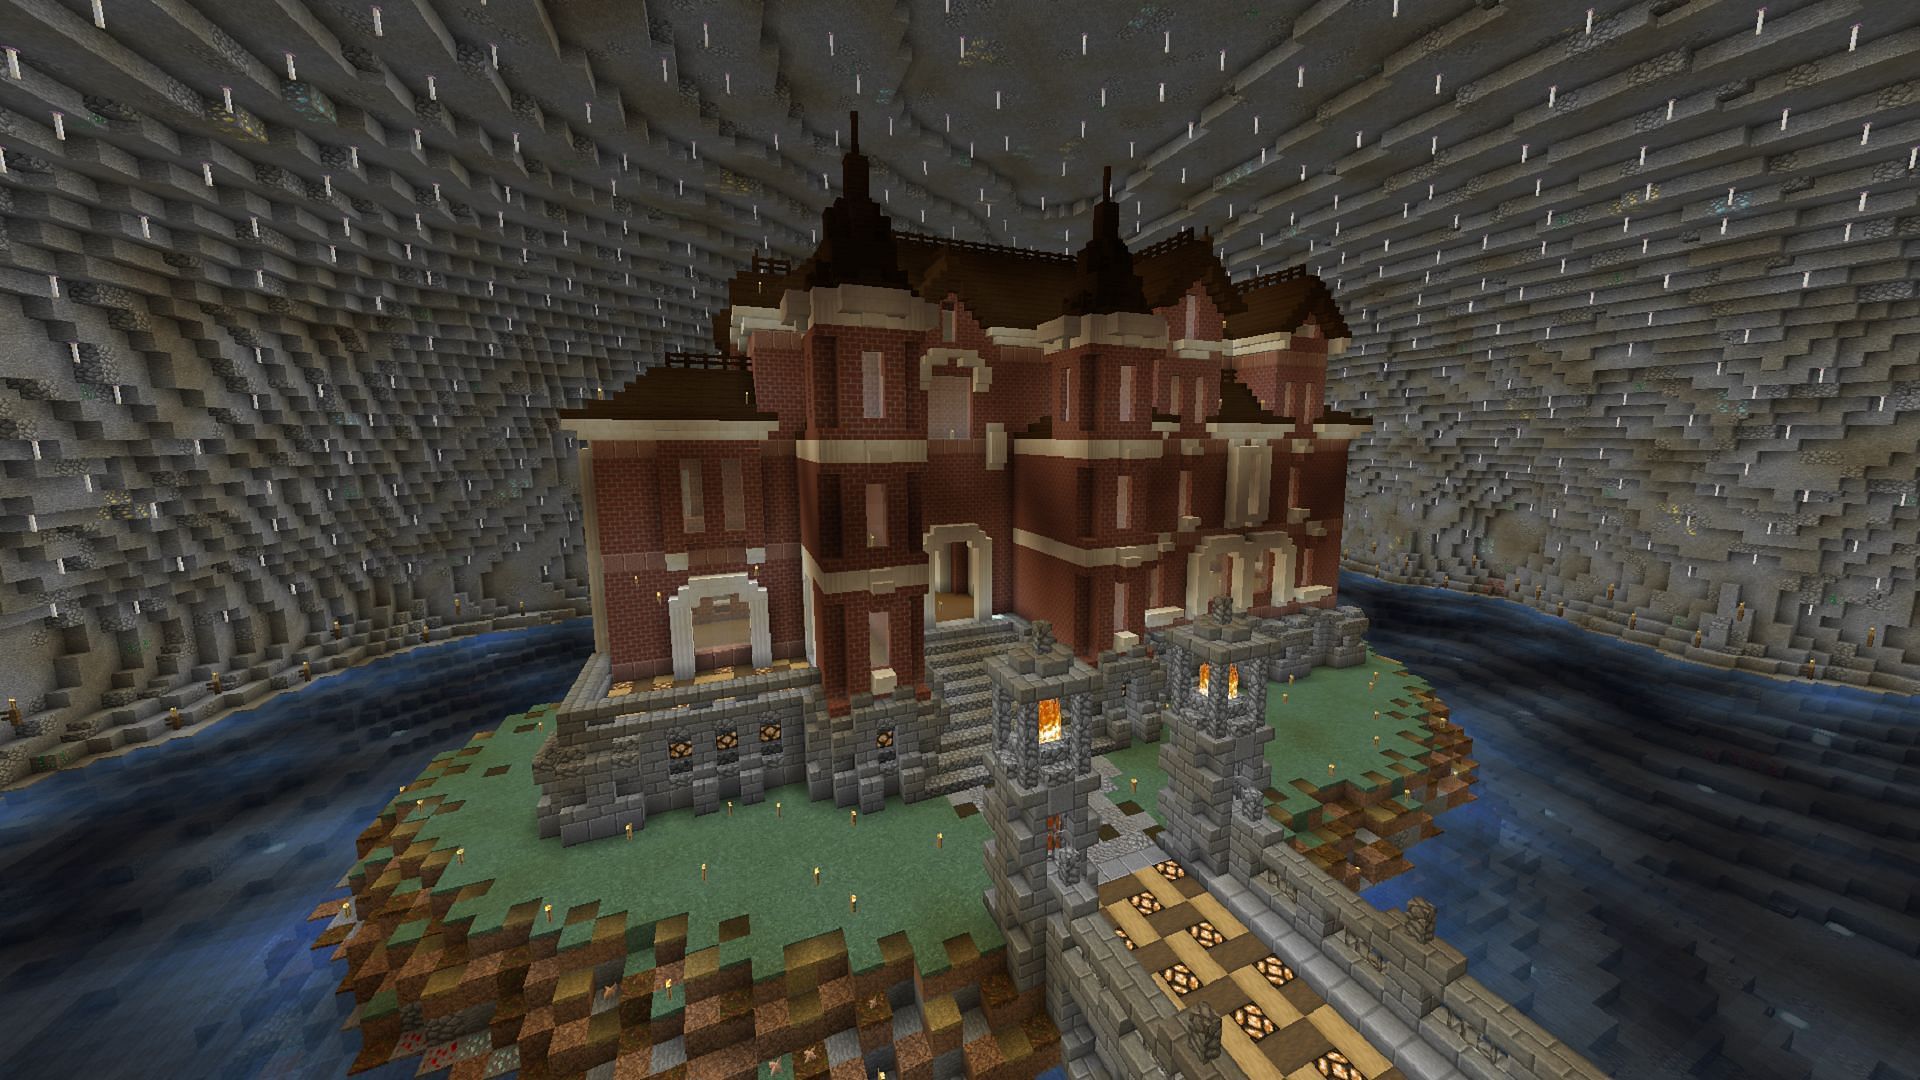 Mansions can be just as captivating underground as they are above ground (Image via Aminto9/Reddit)